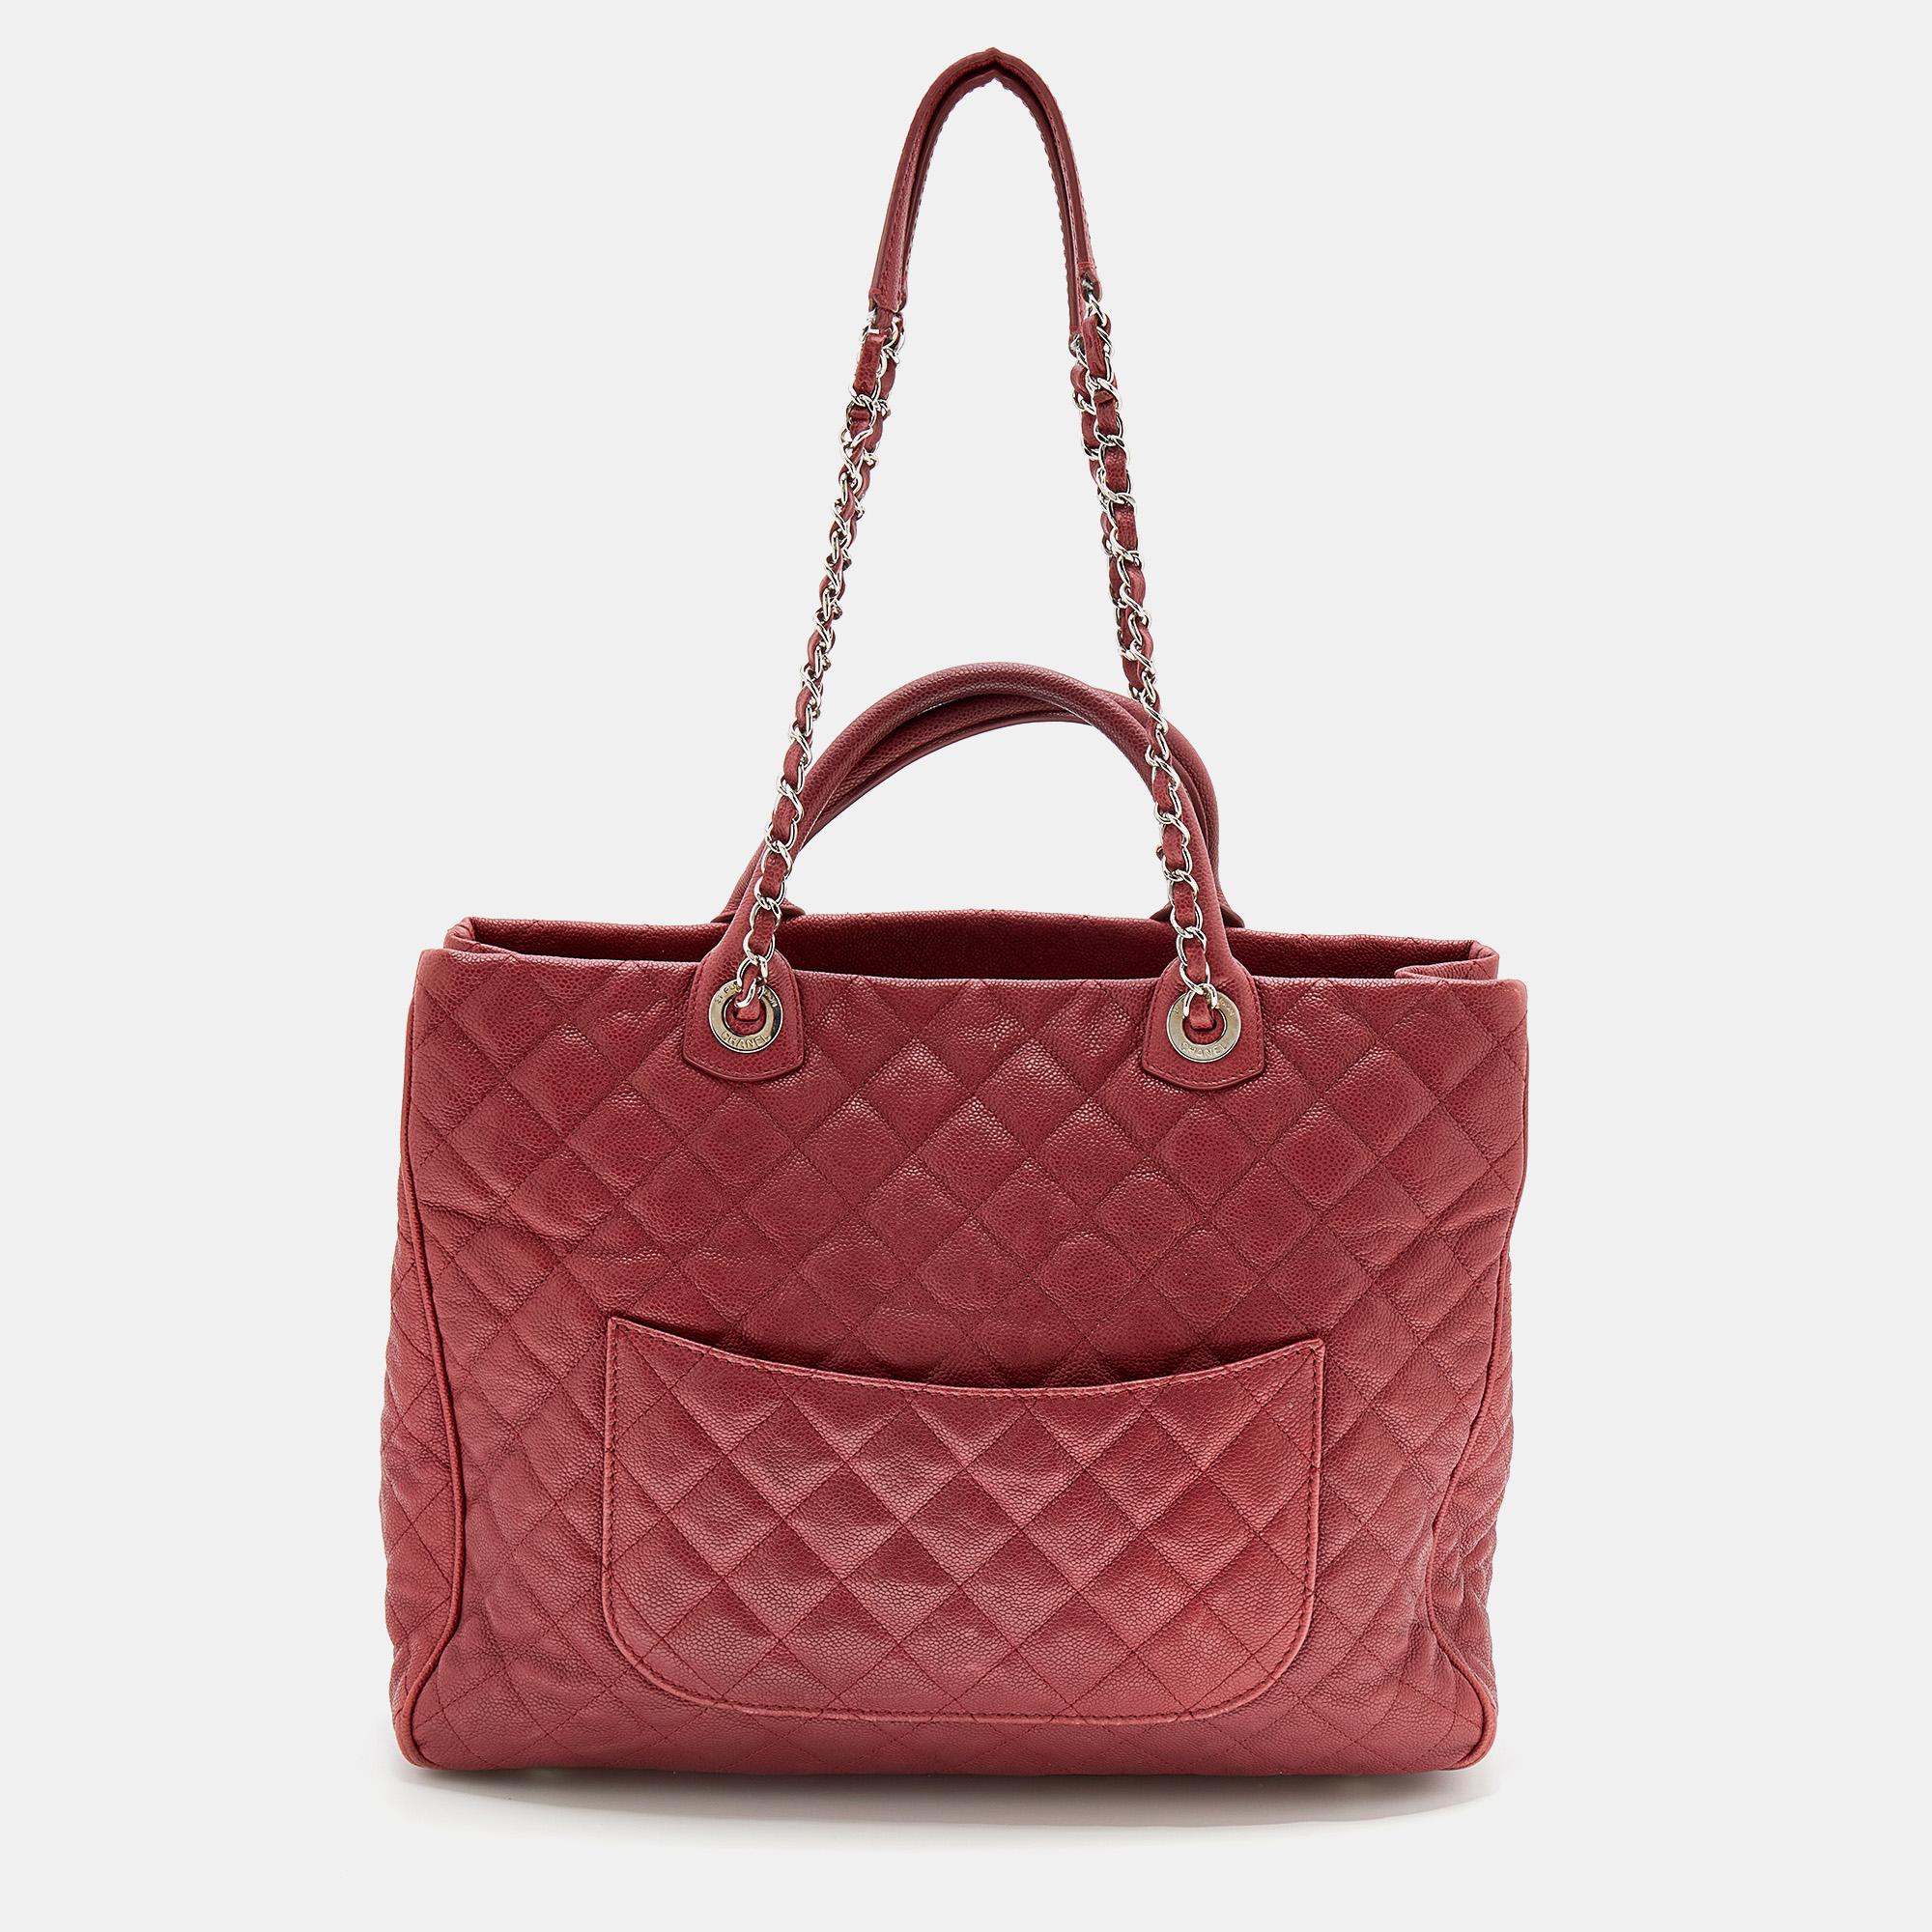 This pre-owned Chanel Shiva tote is a timeless piece that can last you season after season. This bag is made of quilted Caviar leather and will effortlessly accompany you to work and after. It has a red shade, front logo detail, different handles,